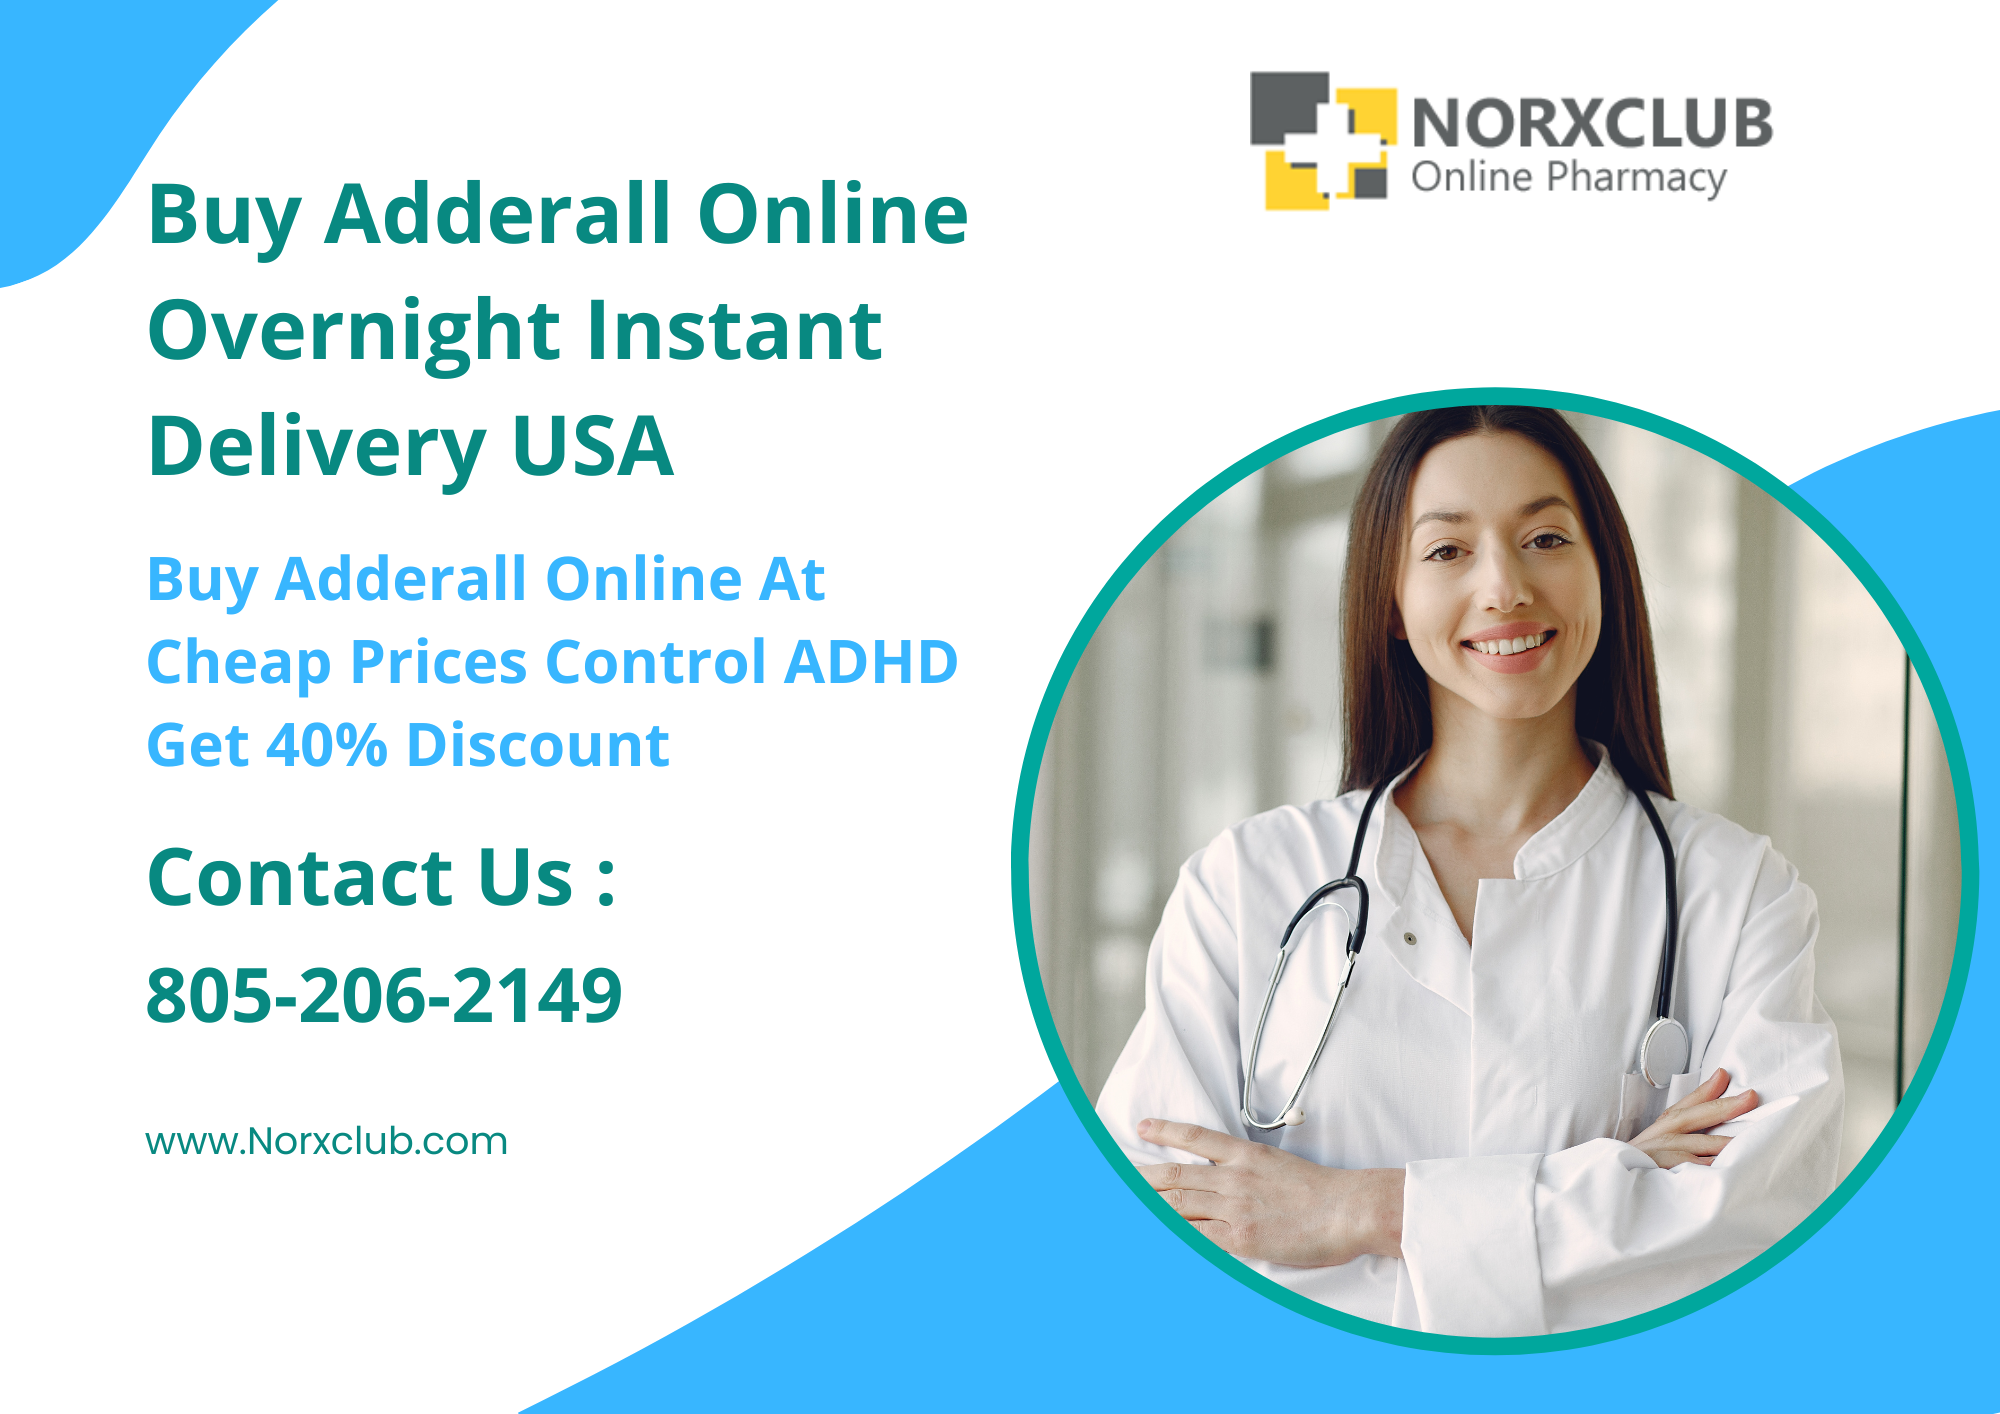 Buy Adderall Online Cheaply Via Credit Card – Pin-O-Zip